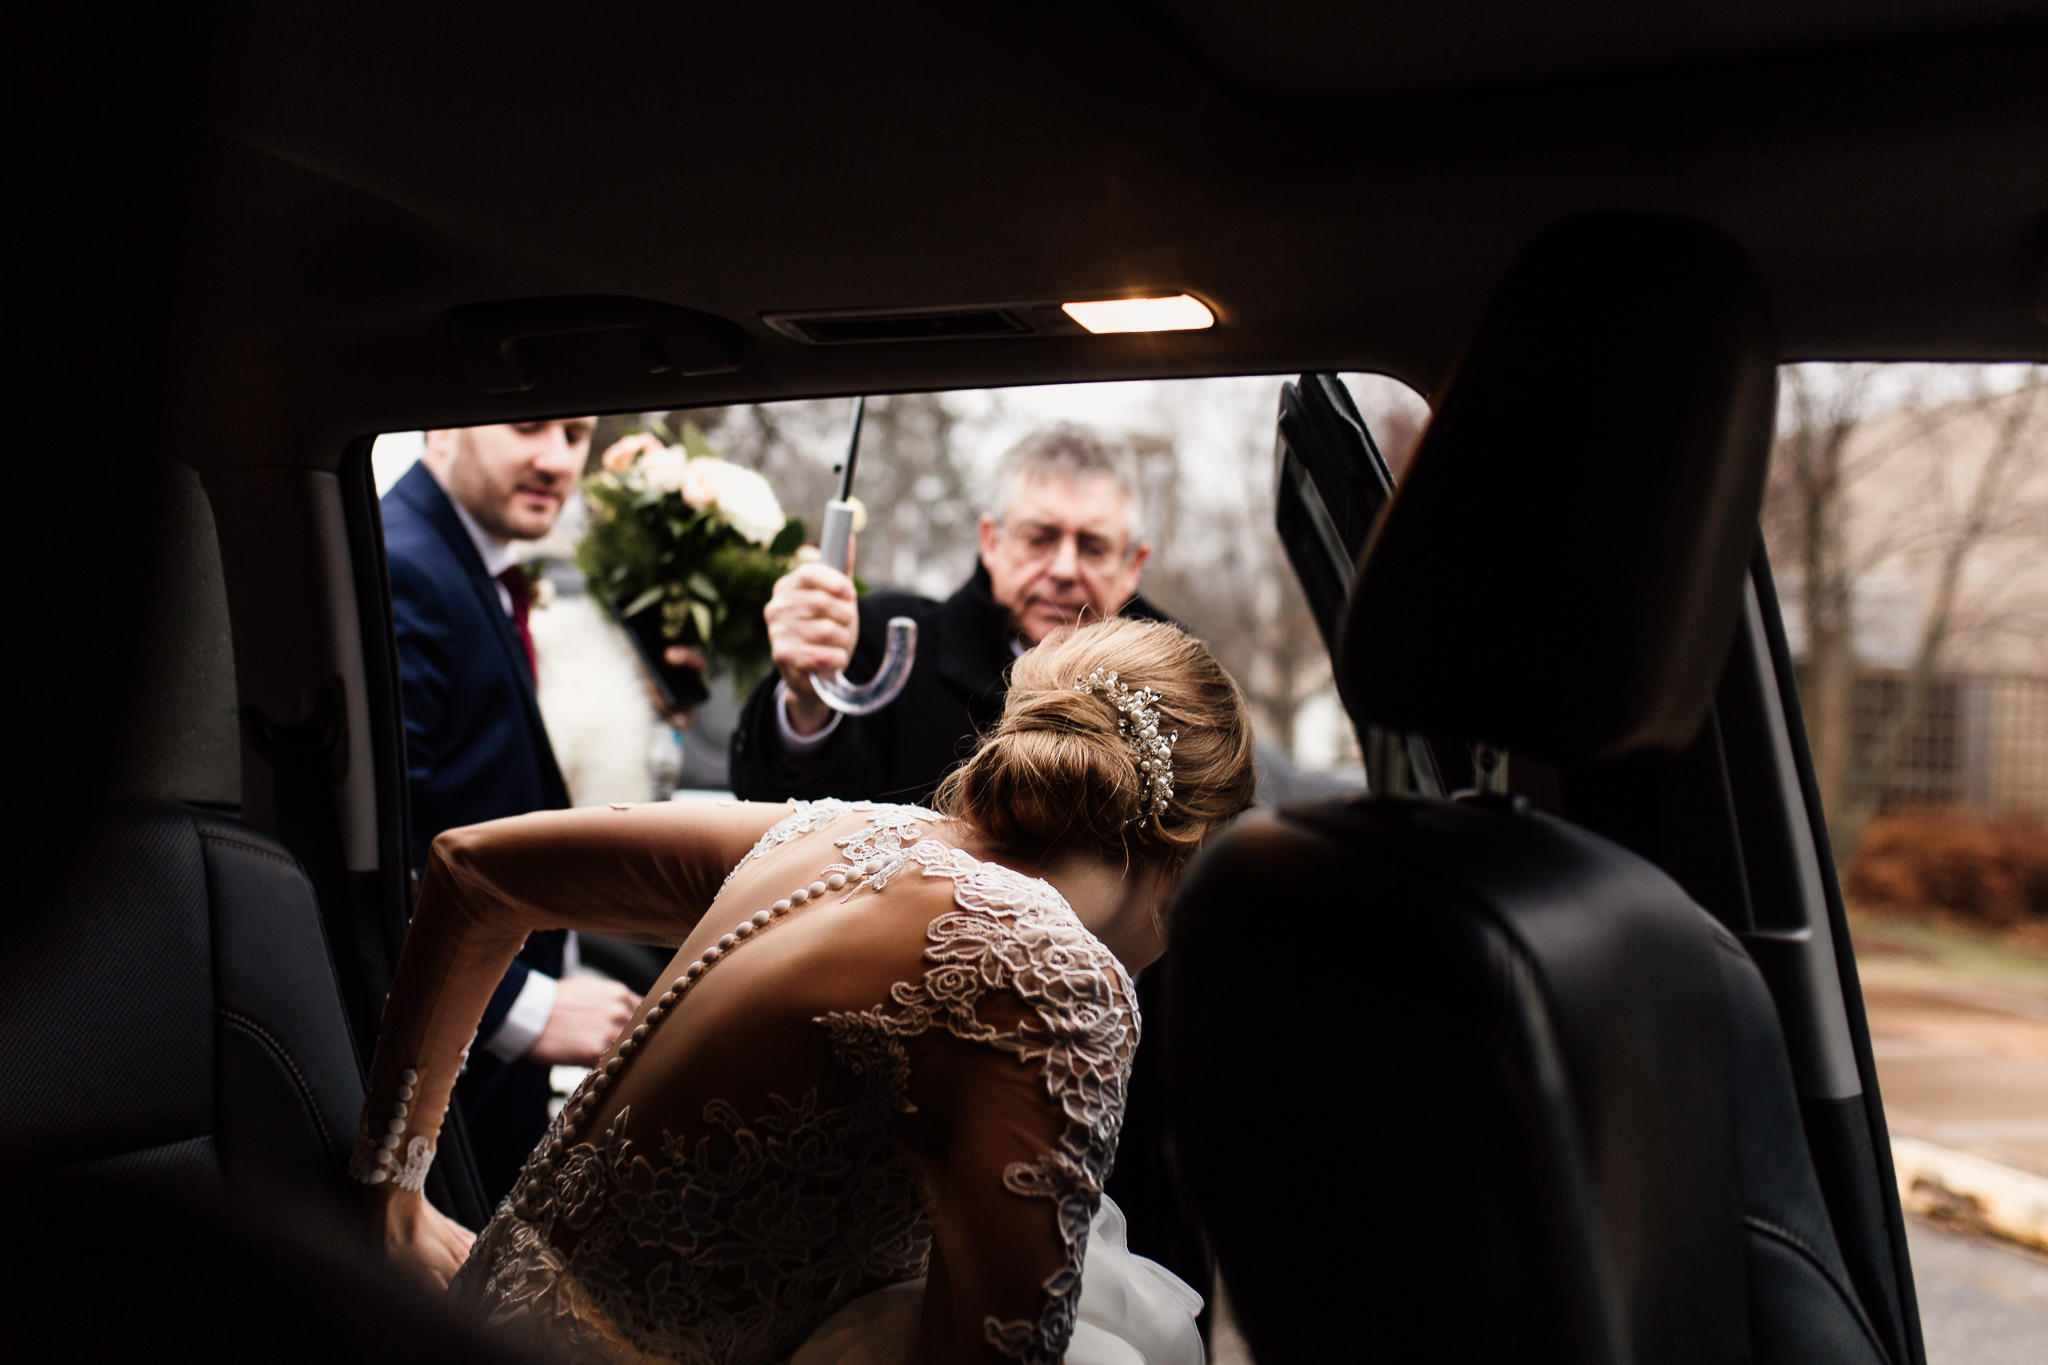 Bride getting out the car on her way to the wedding ceremony.